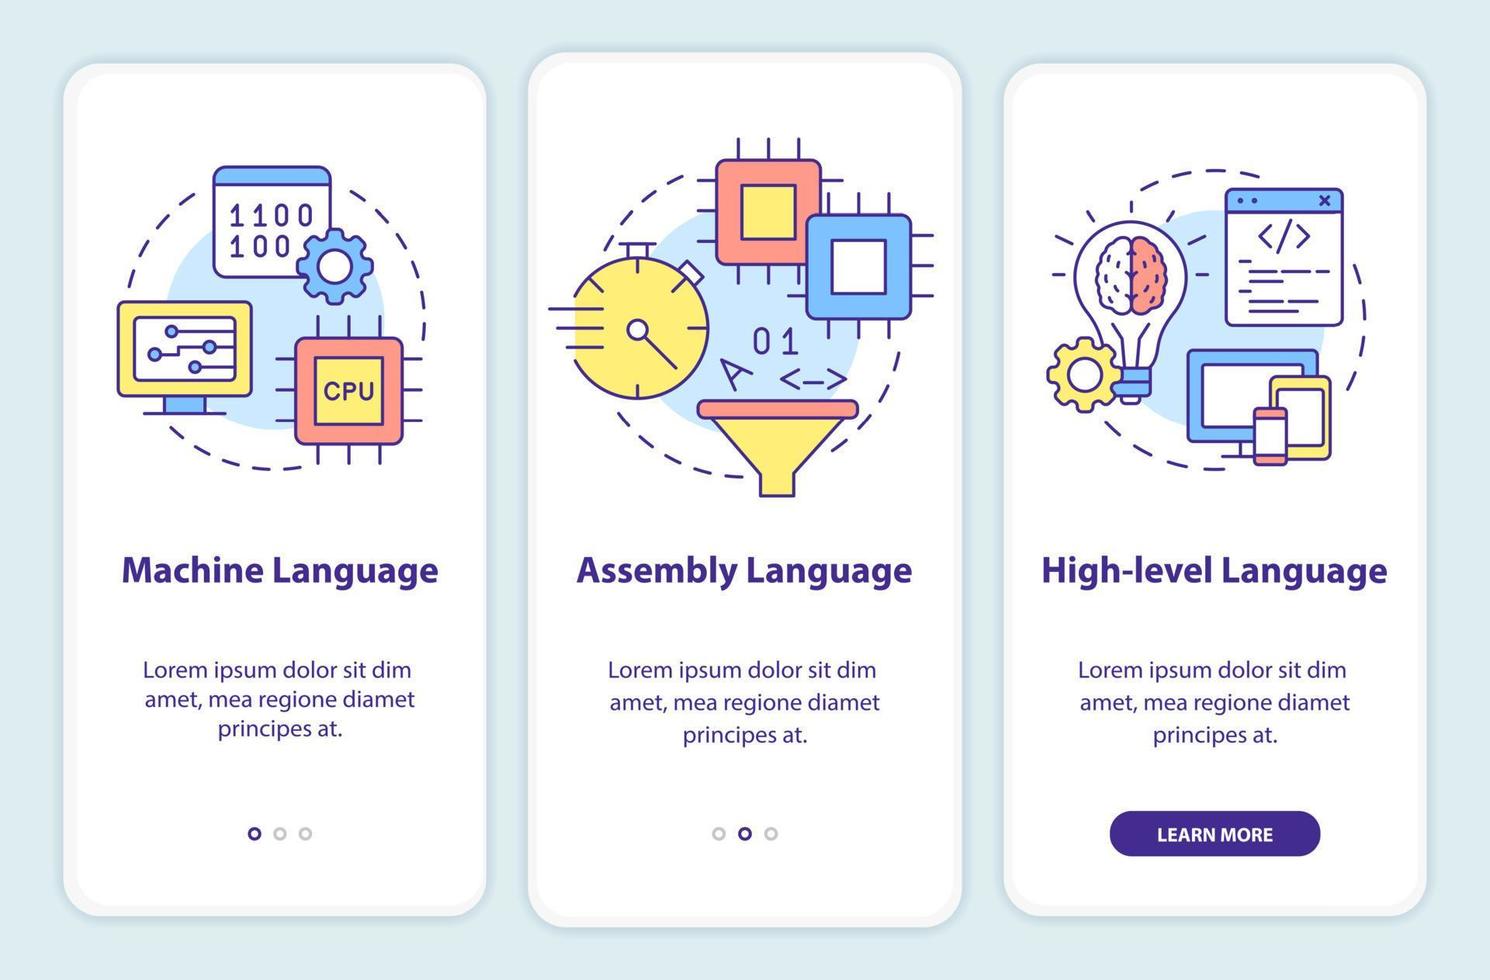 Types of computer languages onboarding mobile app screen vector